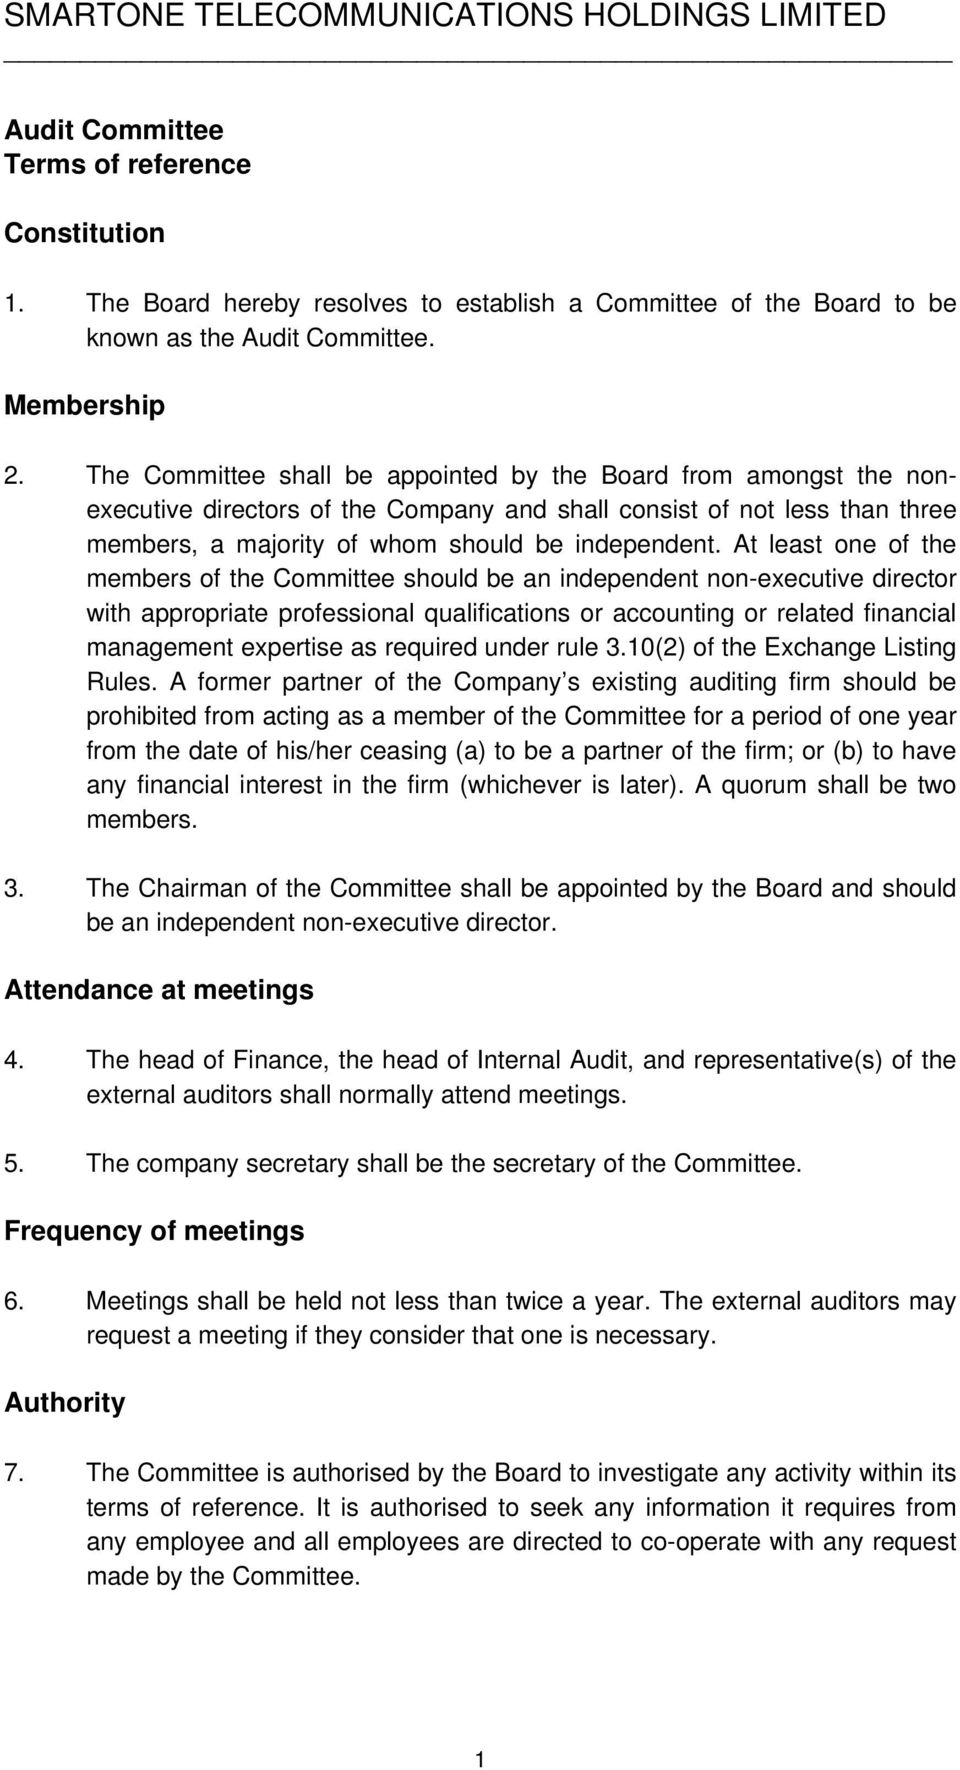 At least one of the members of the Committee should be an independent non-executive director with appropriate professional qualifications or accounting or related financial management expertise as